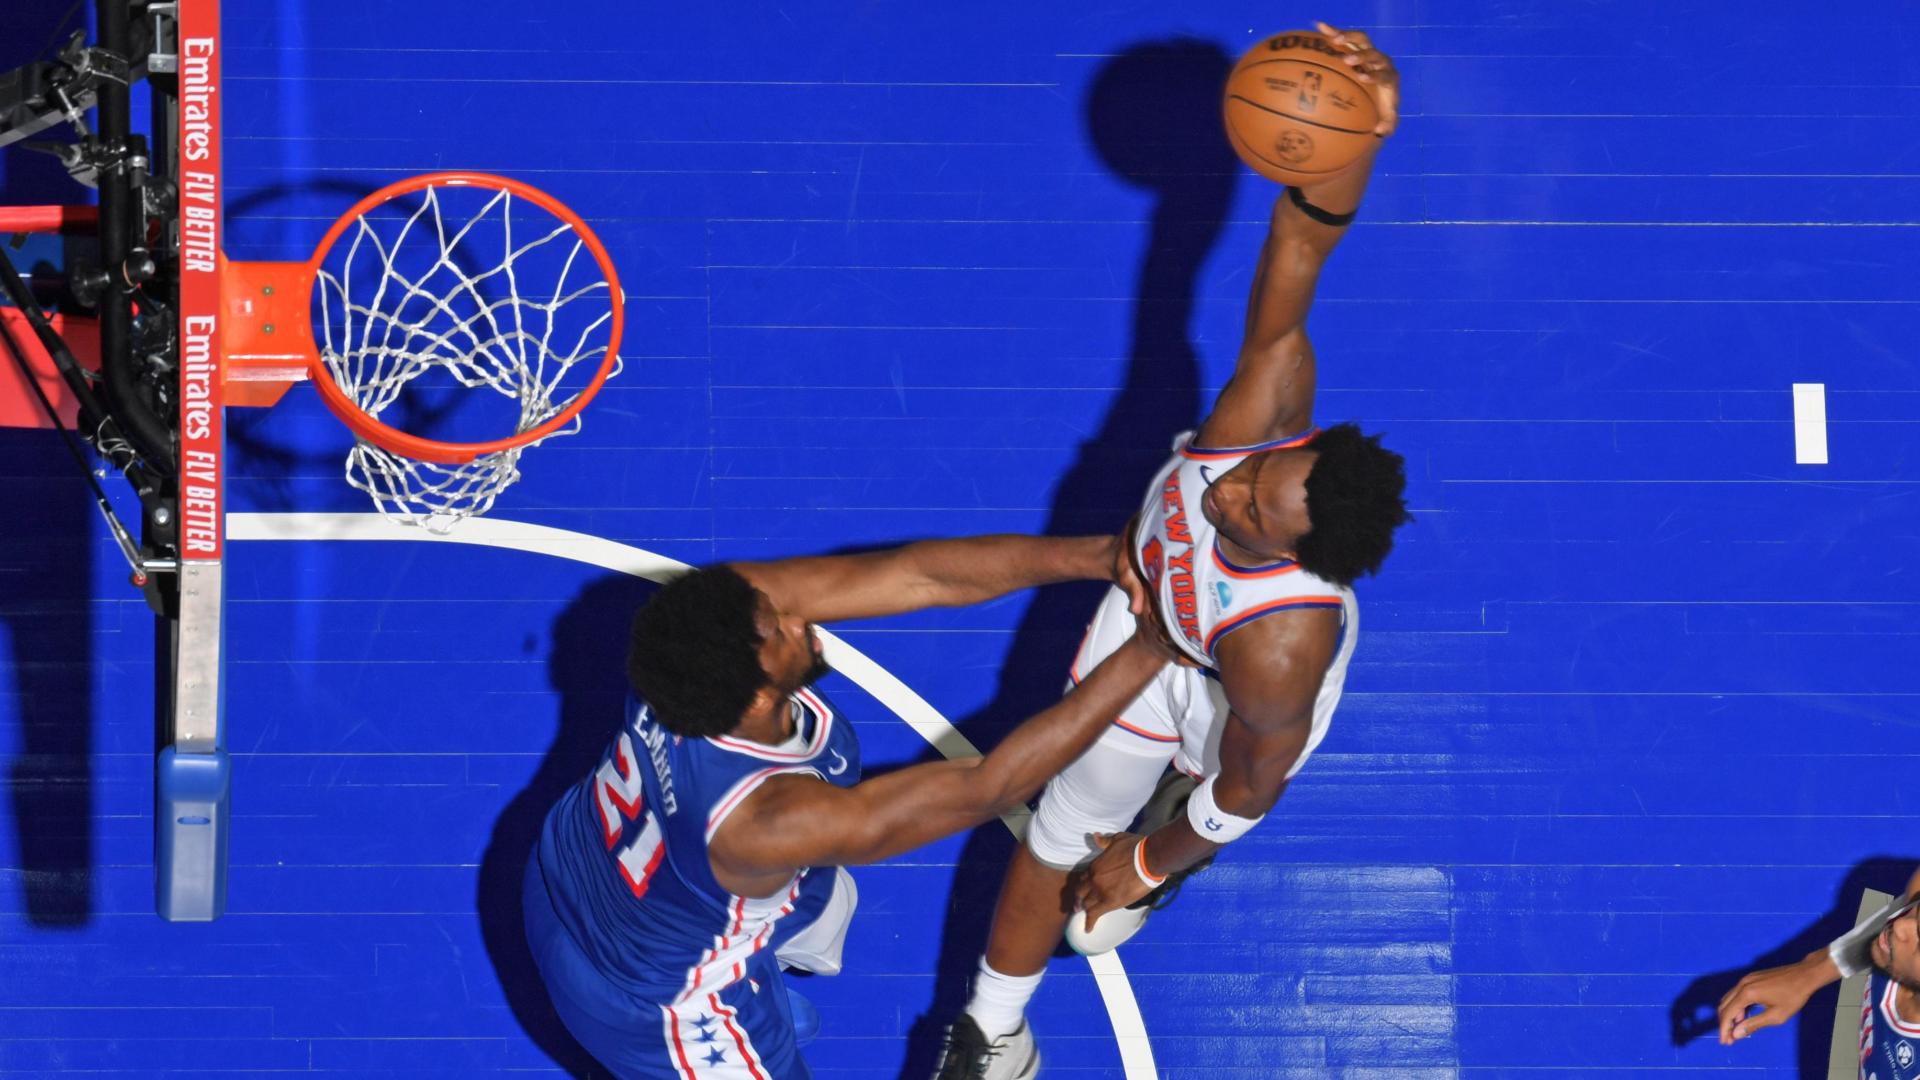 OG Anunoby drops the hammer on Joel Embiid